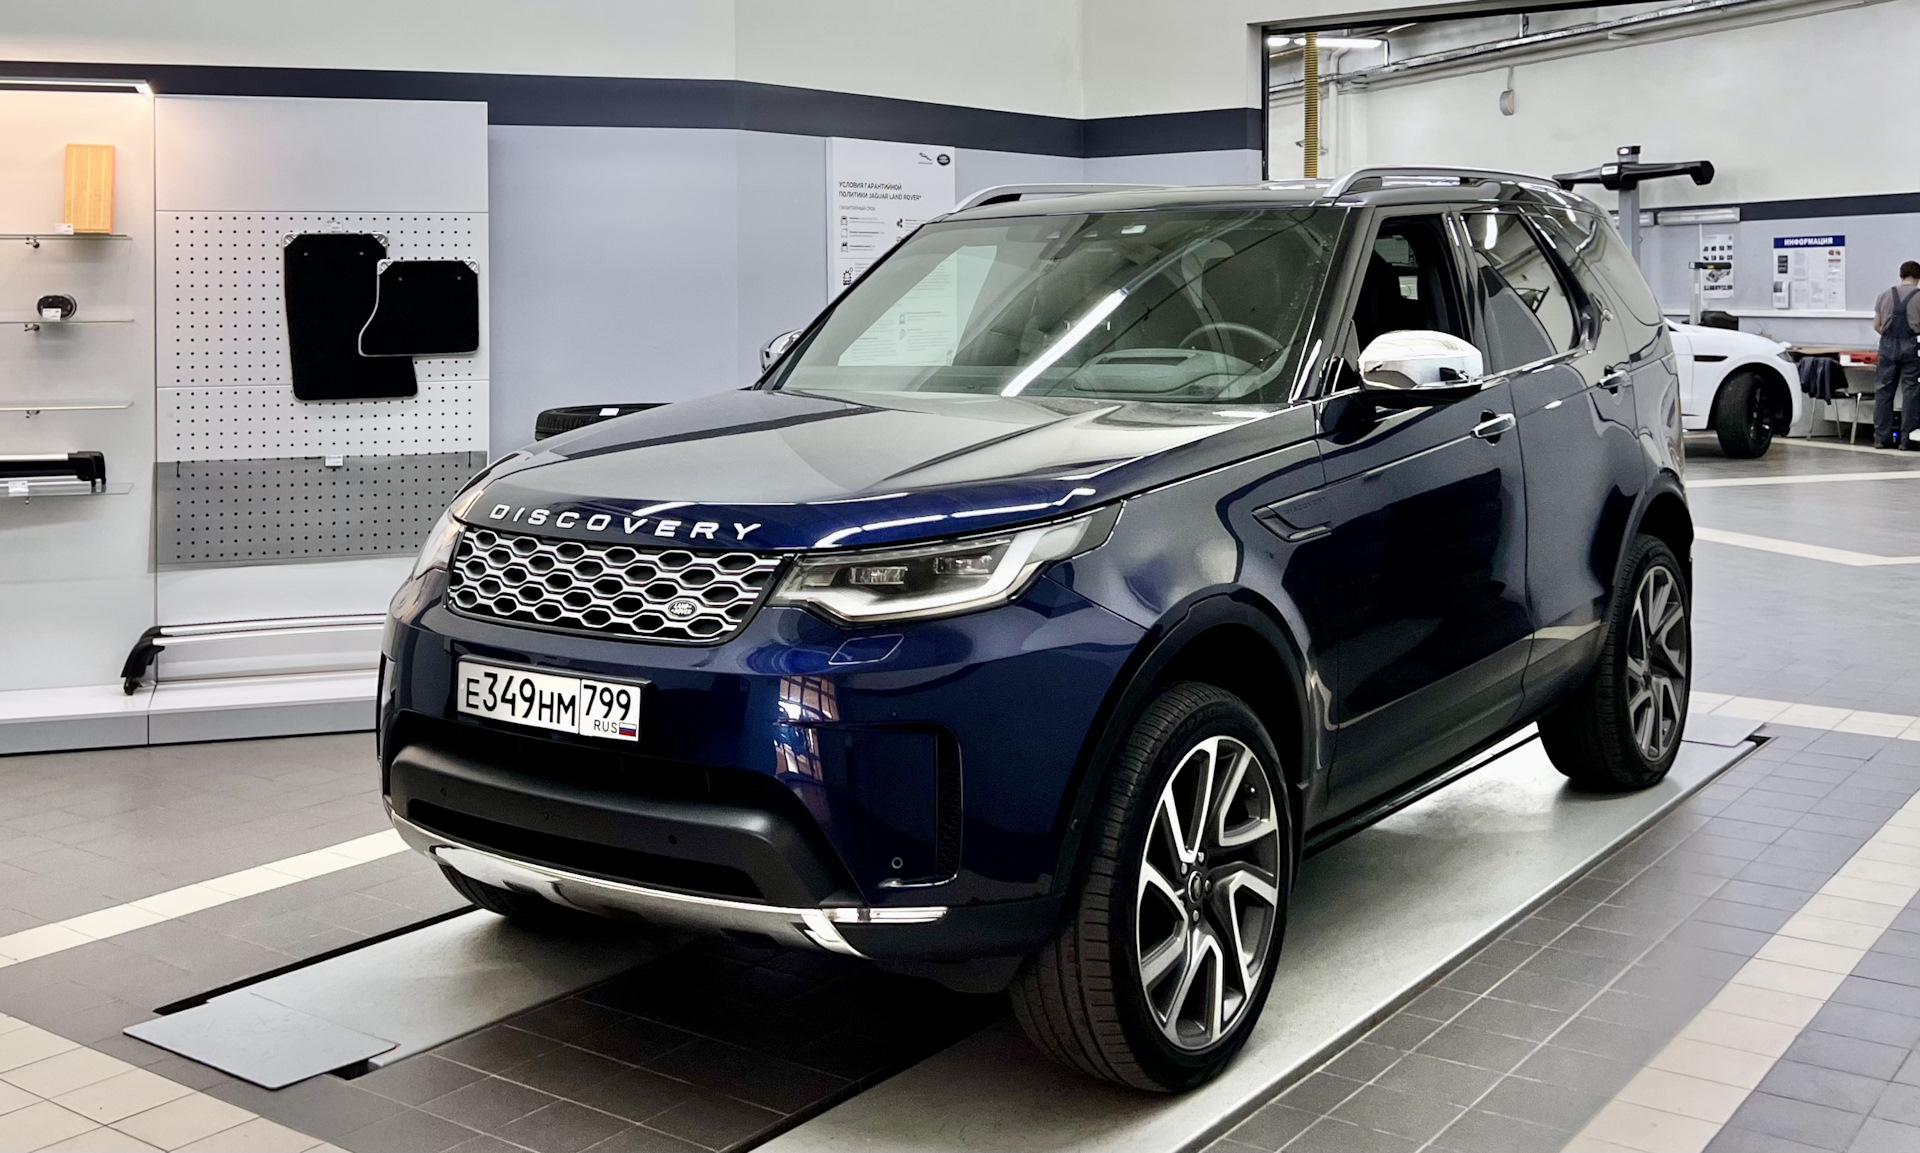 Discovery 5. Дискавери 5 и Дискавери спорт. Land Rover Discovery 5 2.0 синего. Дискавери 5 лифт. Дискавери 5 дизель